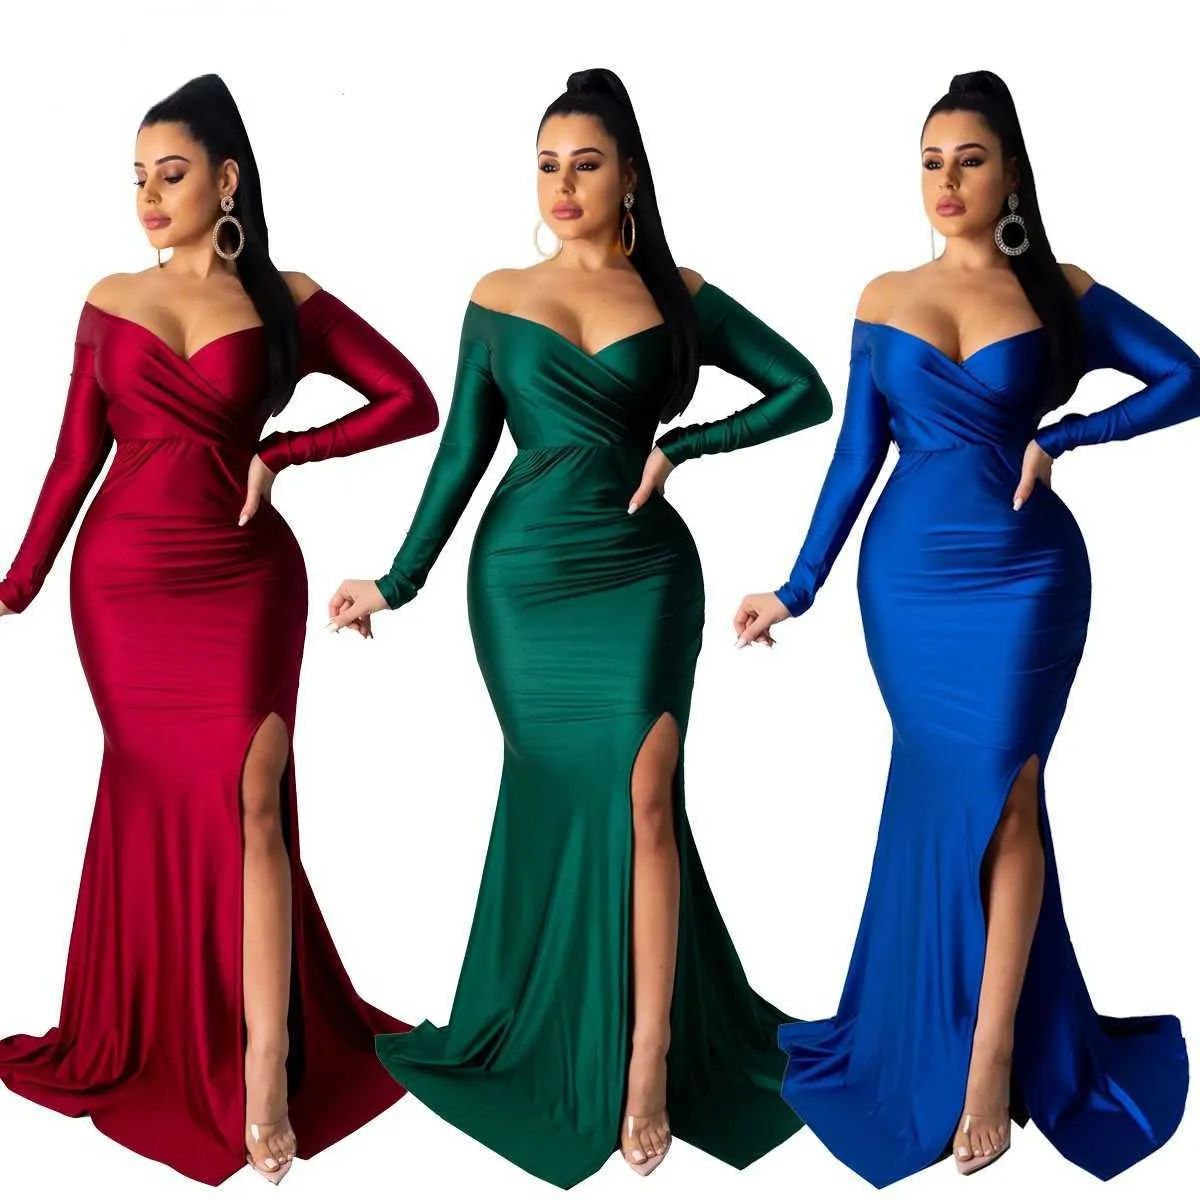 Autumn Winter Women Sexy Night Party Club Long Dresses Off Shoulder Plunging V-neck High Side Split Mermaid Maxi Dress Y1006